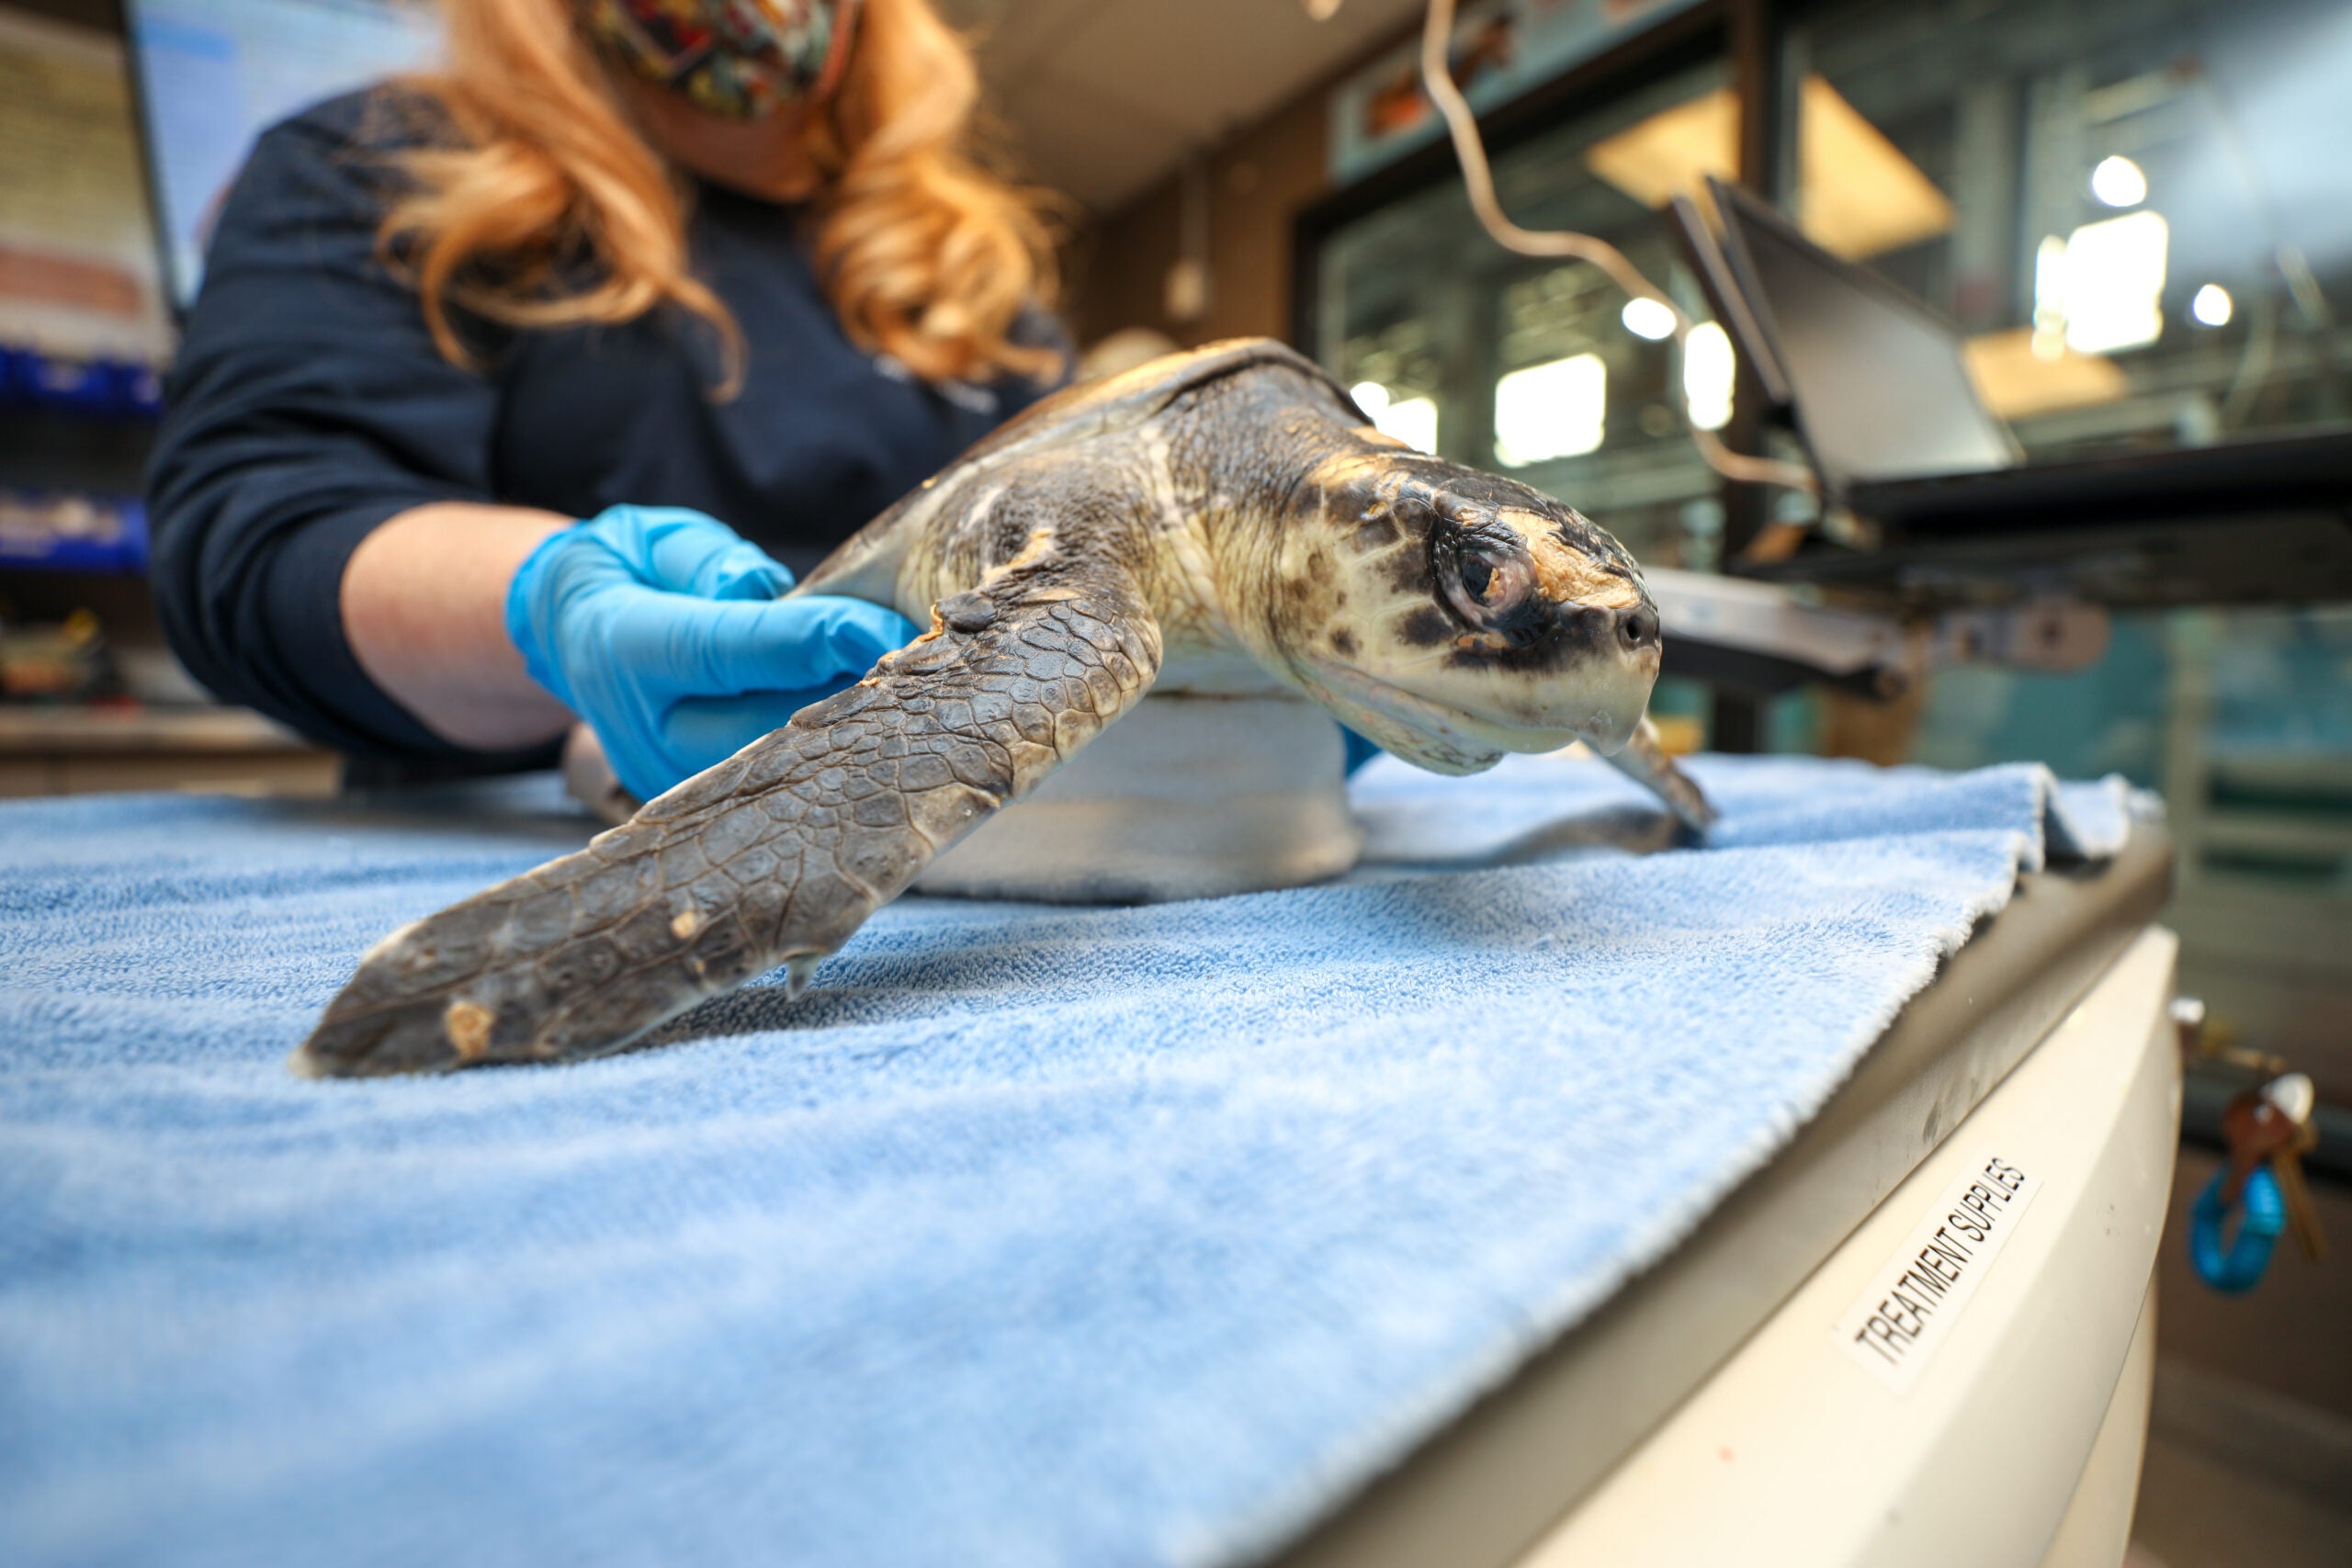 13 cold, stunned sea turtles from New England given holiday names